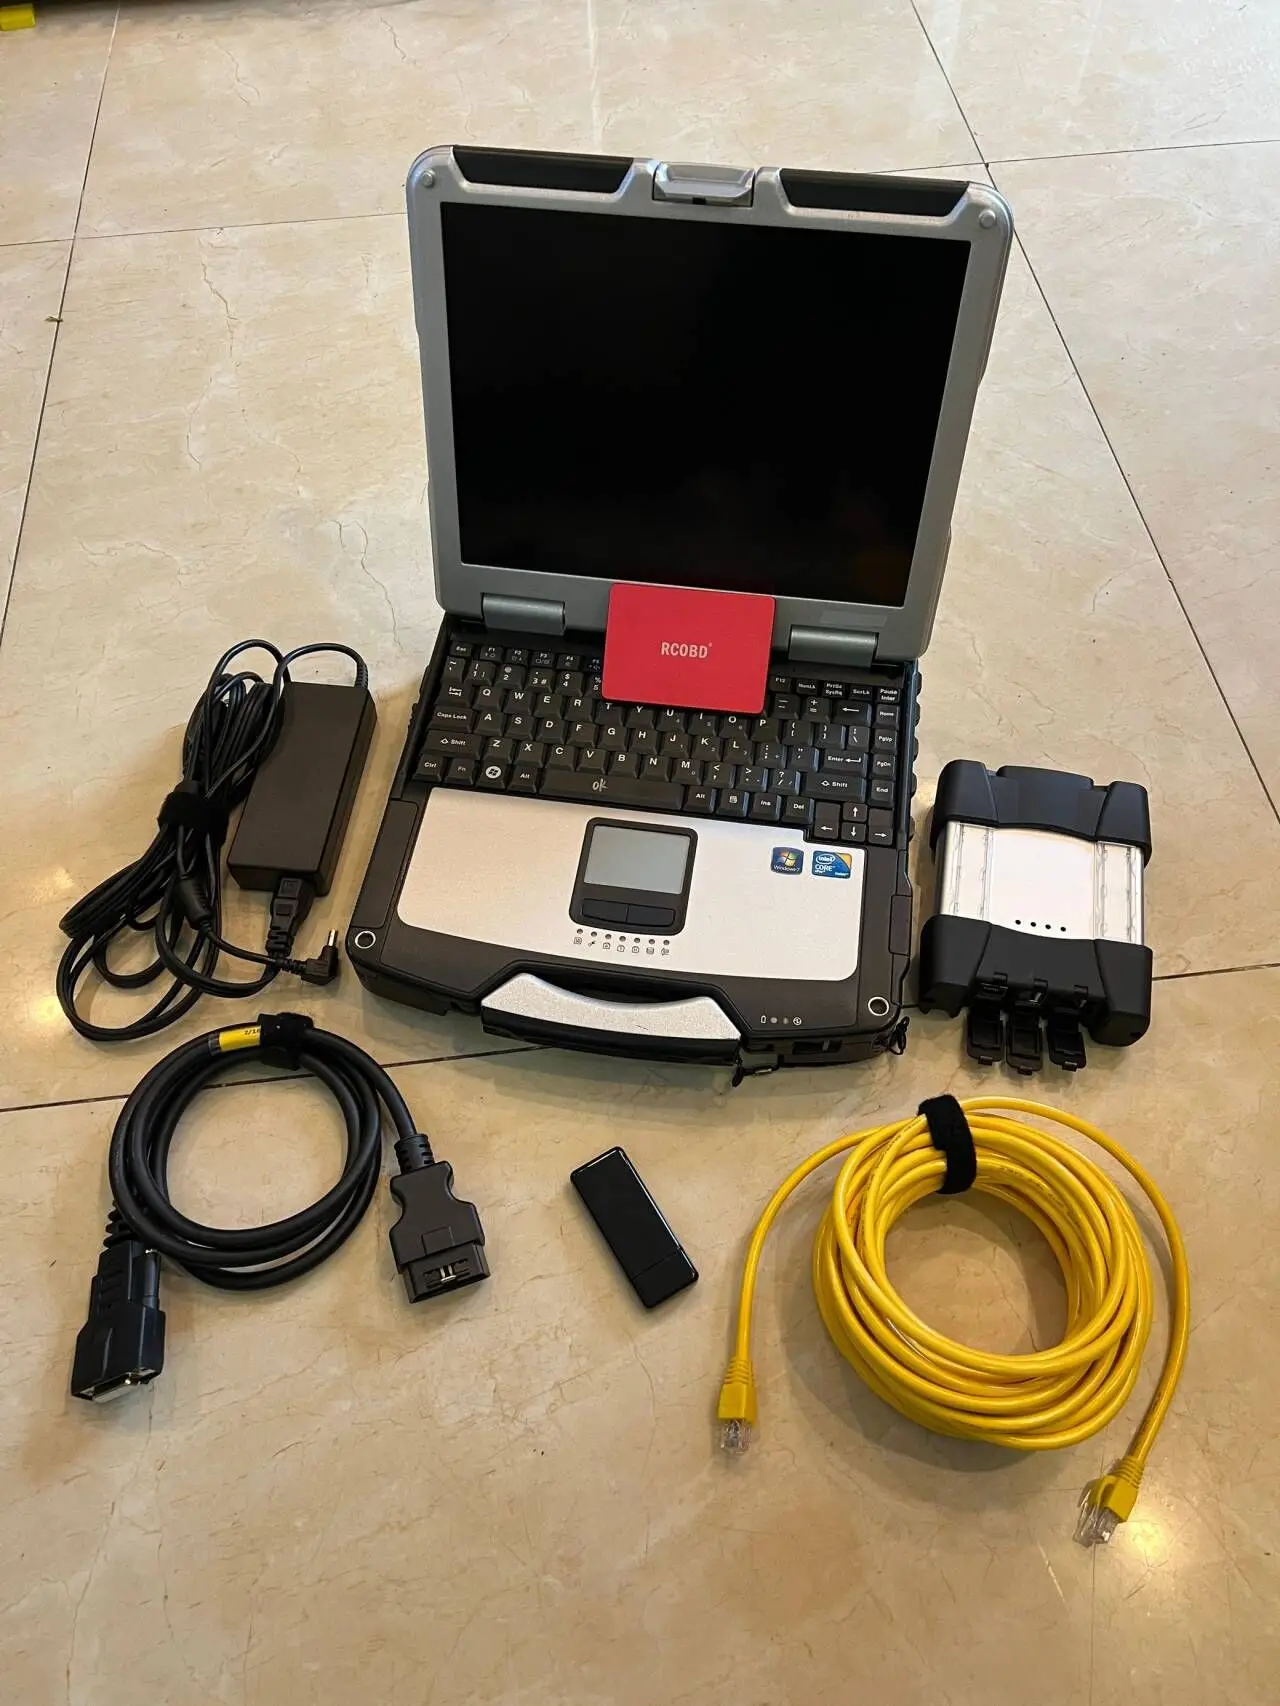 

2023 Icom Next Wifi for Bmw Diagnostic Scanner with Laptop Toughbook CF31 I5 4G Software SSD 960GB Obd Cable Full Ready to Use